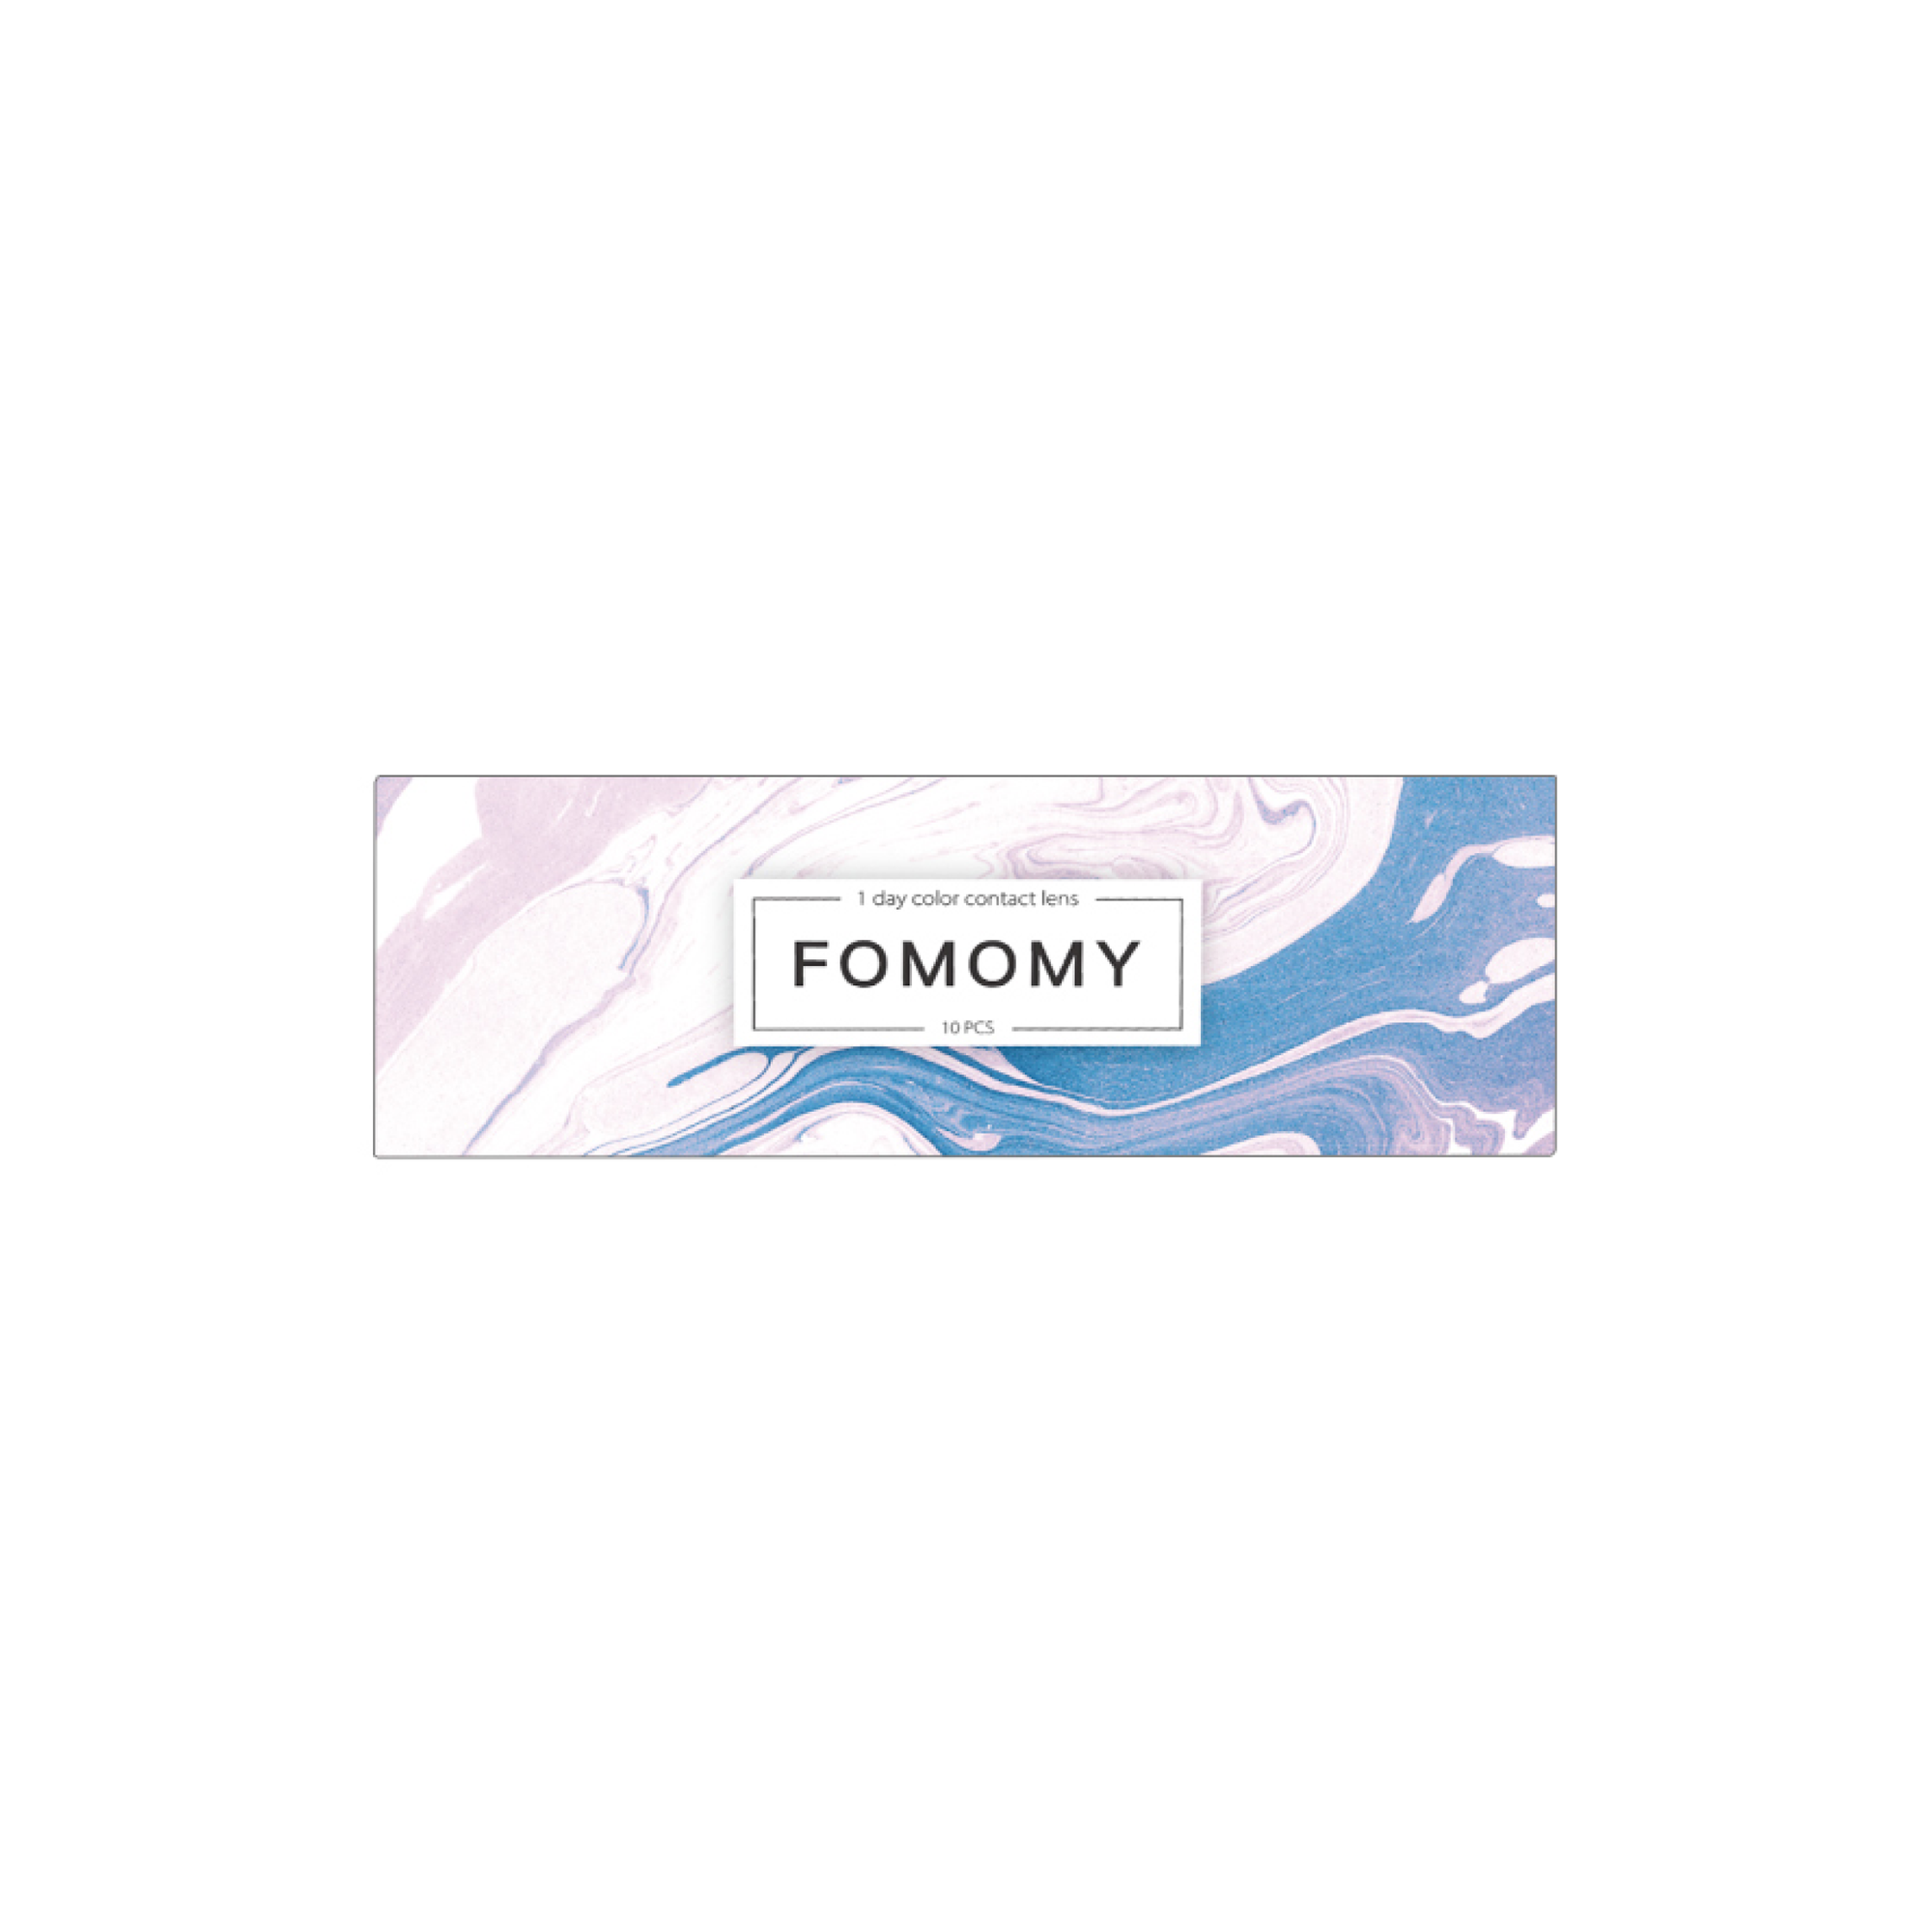 Fomomy 1-Day color contact lens #Cameo pink日抛美瞳豆沙粉｜10 Pcs